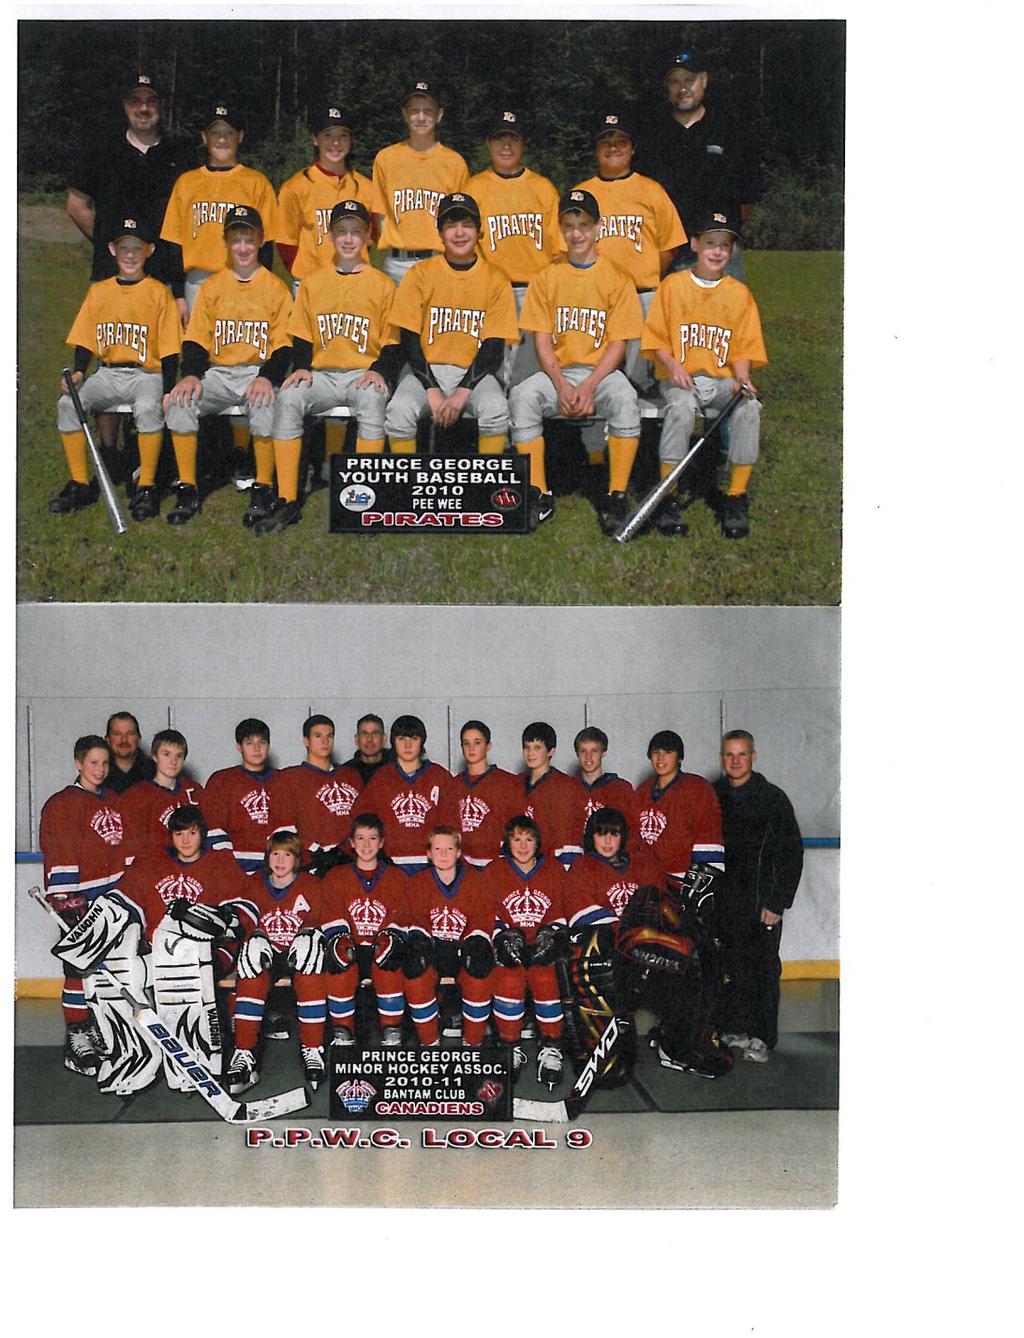 Page 8 Did You Know The PPWC sponsors many different minor sports. These include youth baseball, minor hockey, youth soccer, lacrosse, and ringette.